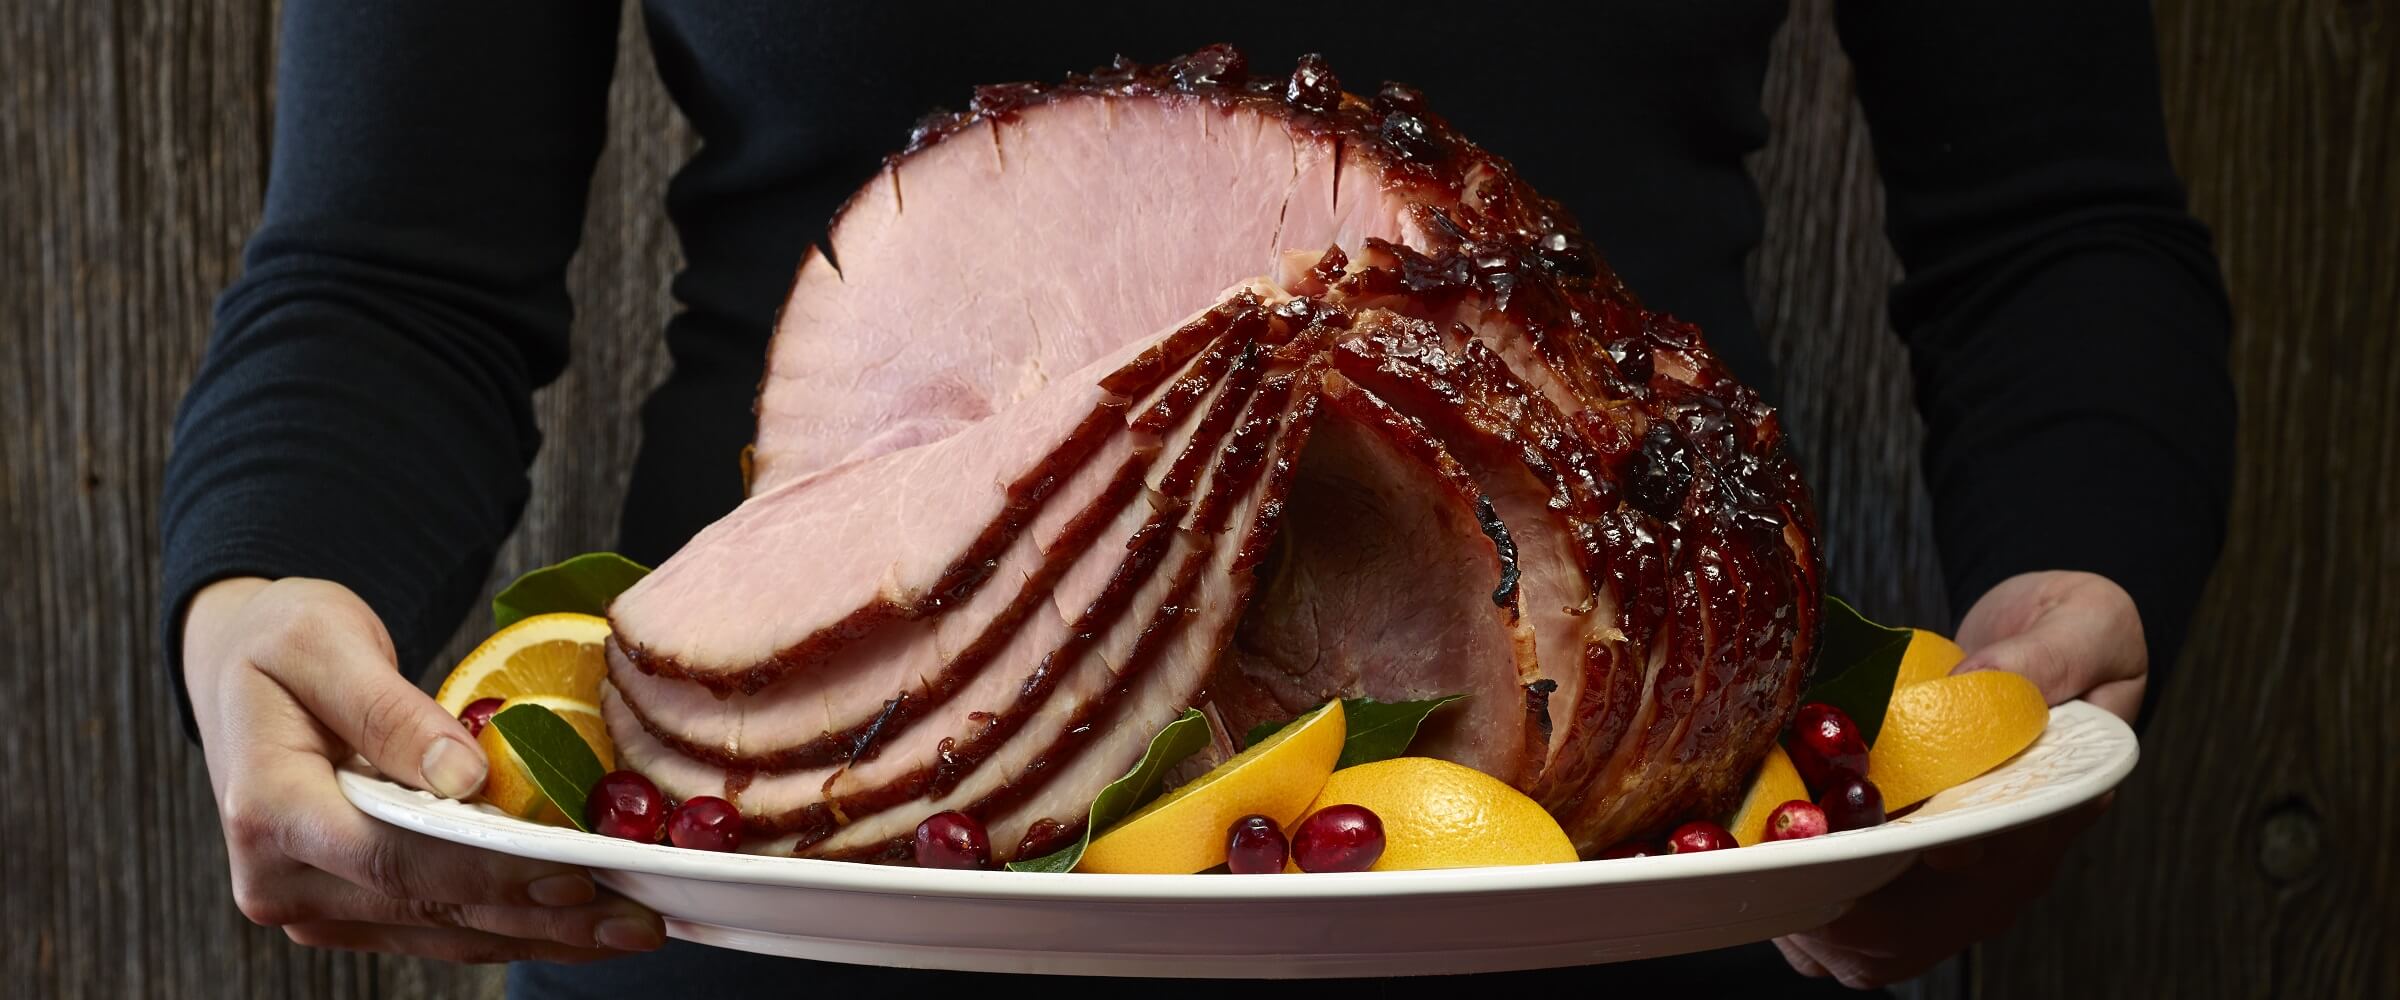 how-to-glaze-a-fully-cooked-hormel-ham